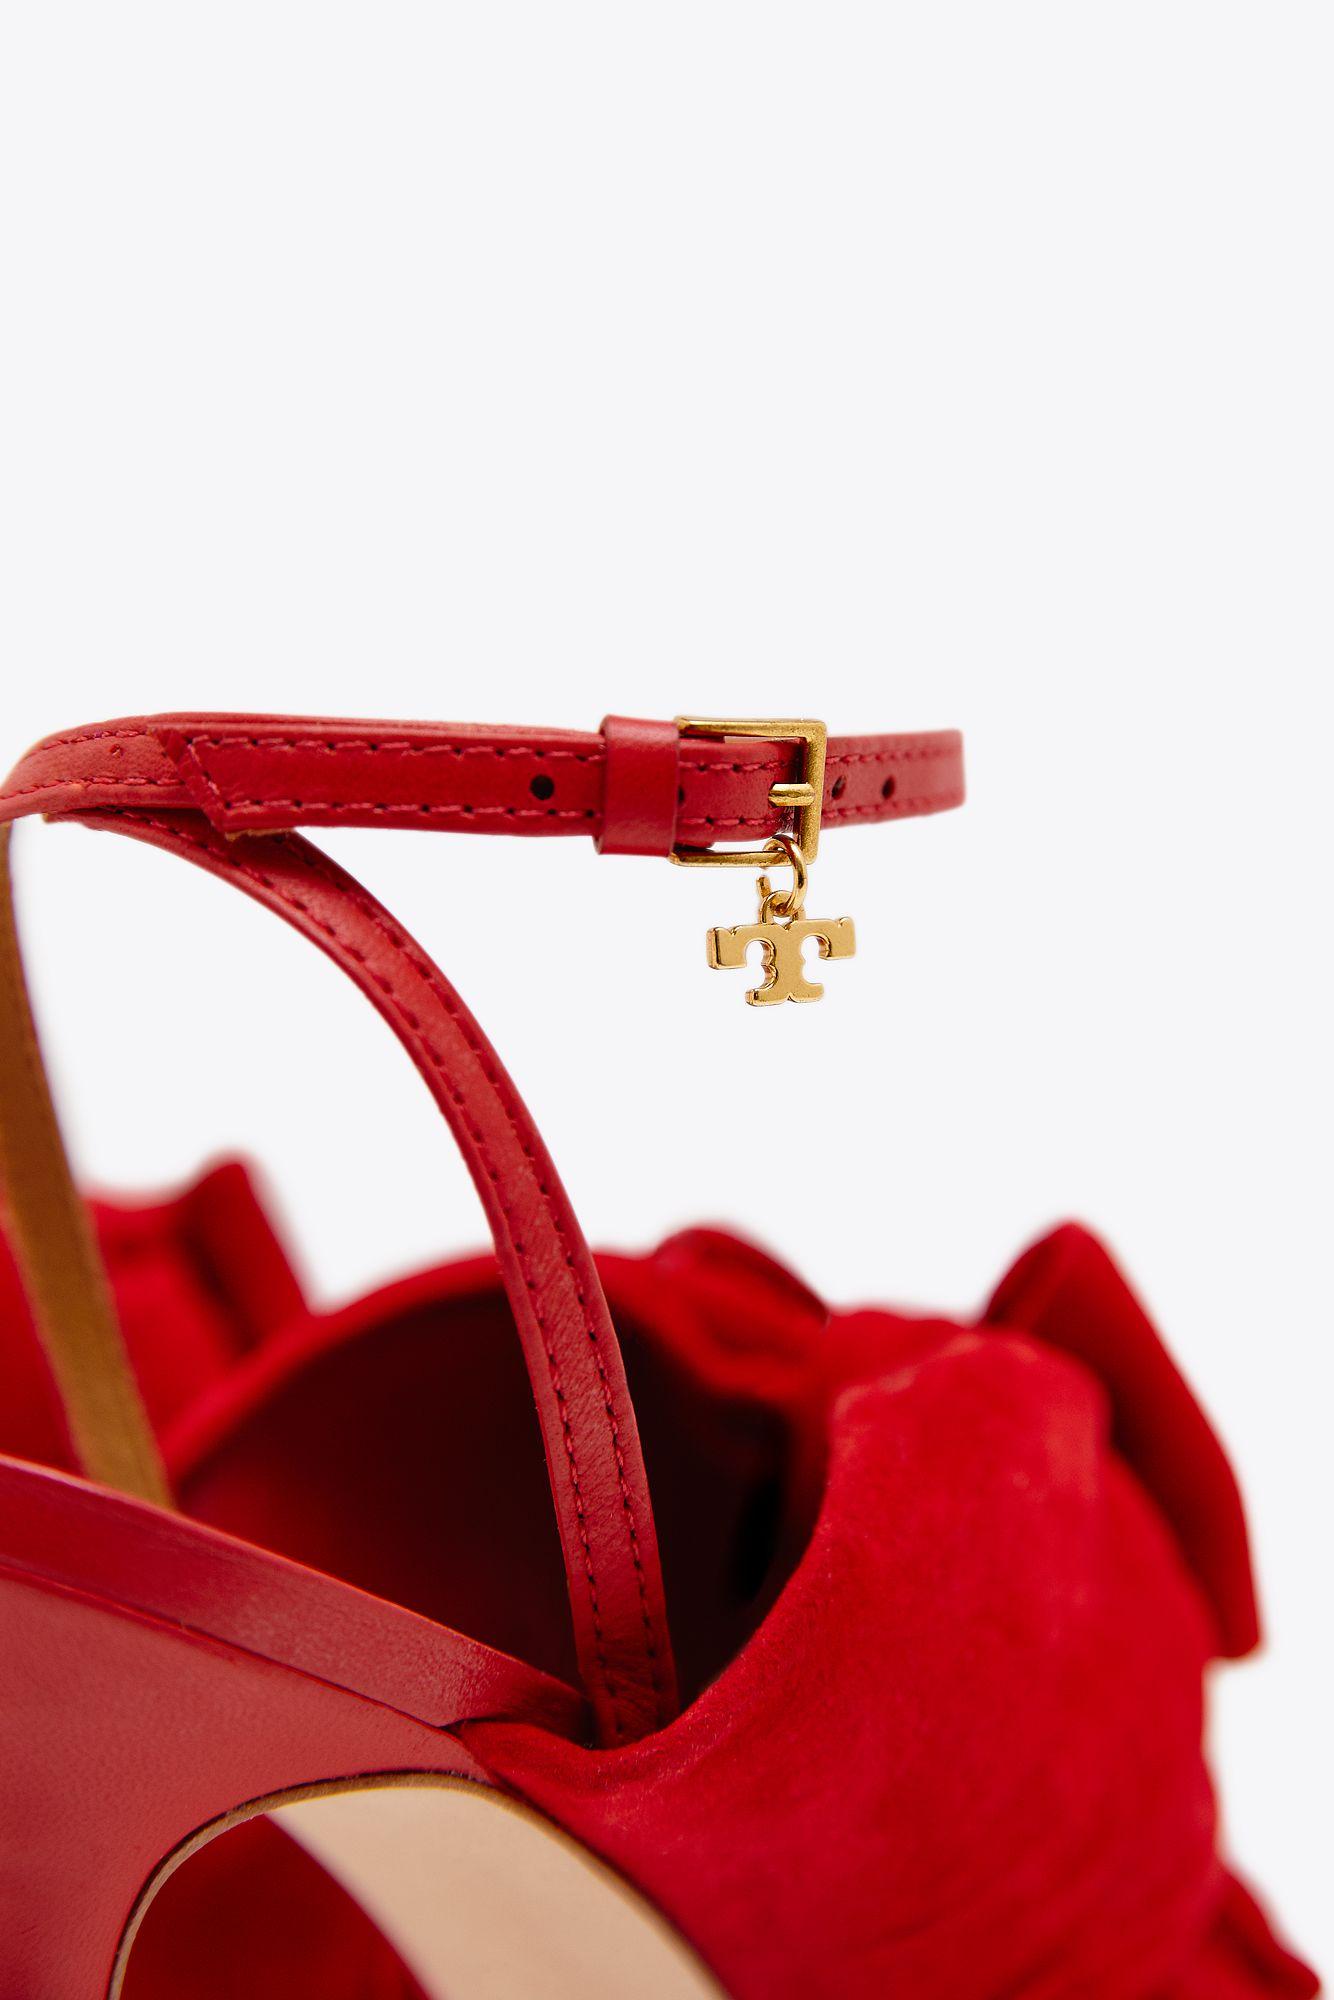 Tory Burch Eleanor Sandals in Red | Lyst